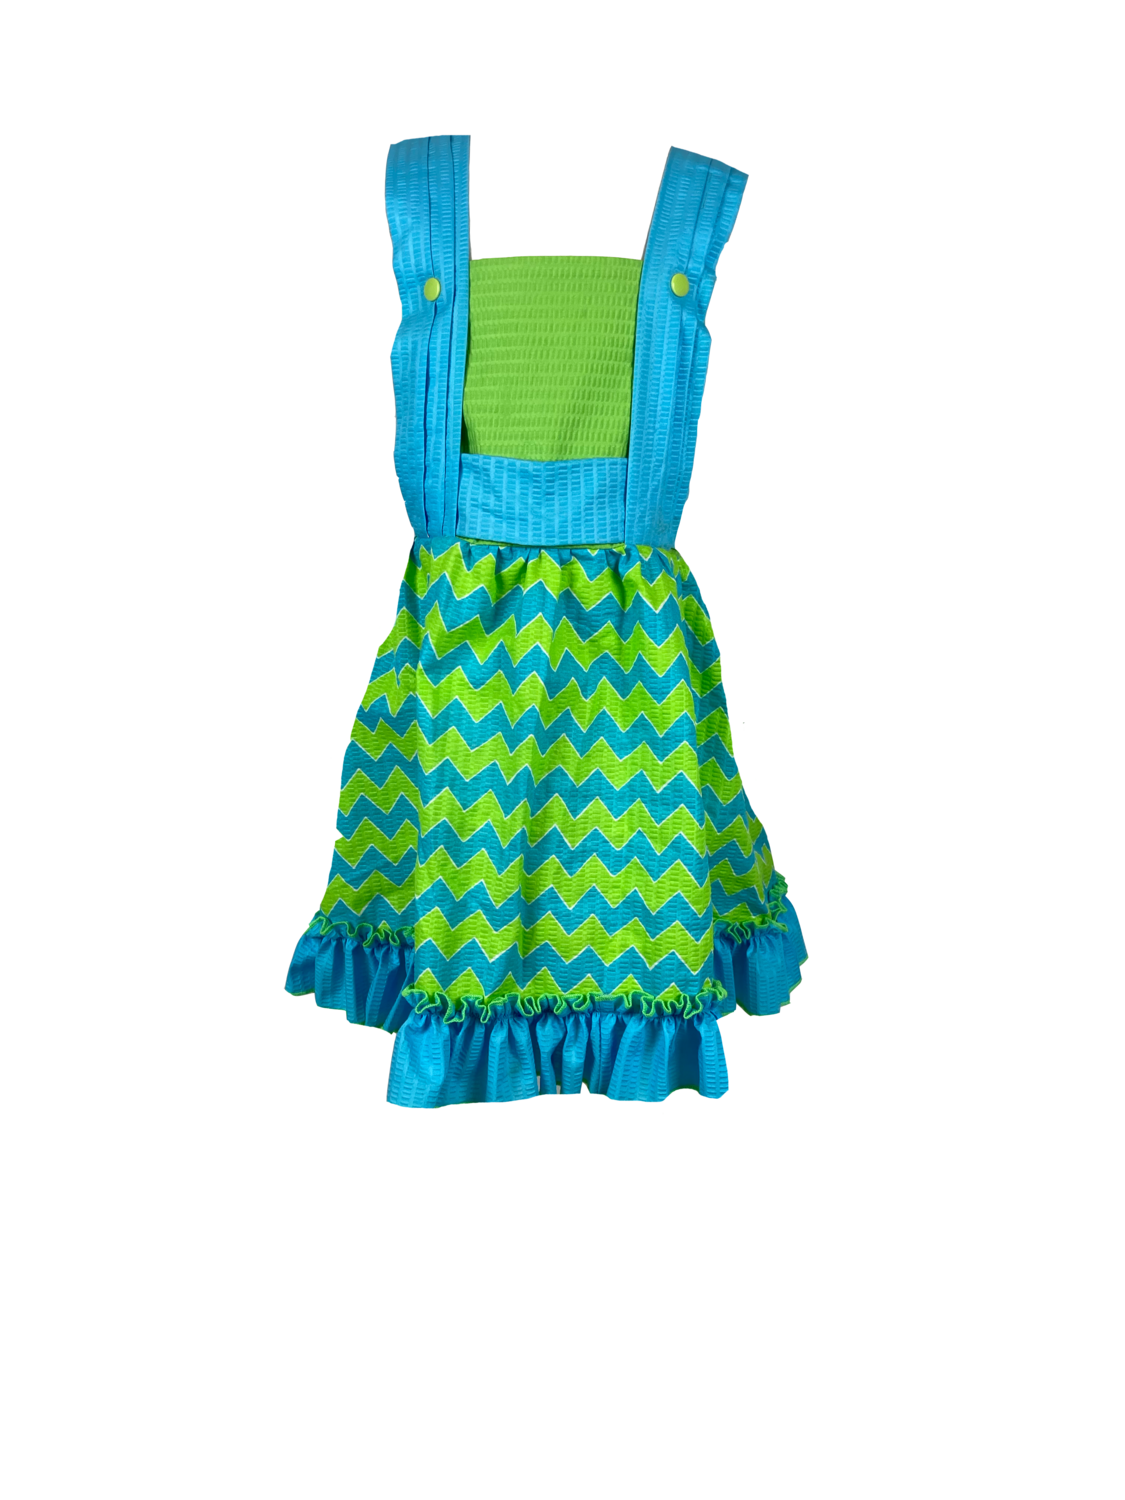 Neon and Turquoise Spring Dress (Size 18-24 M)